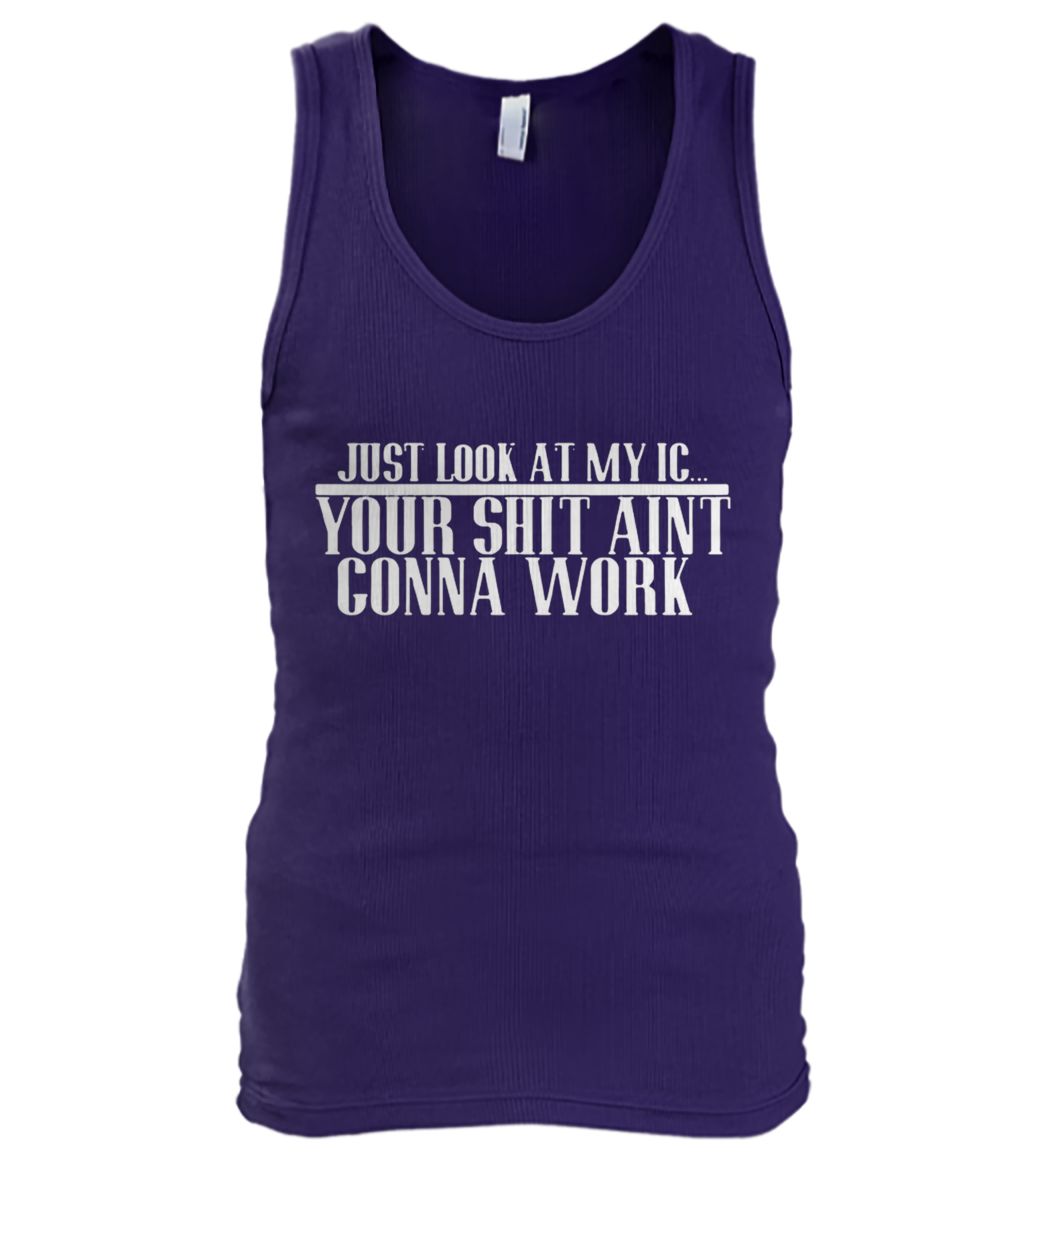 Just look at my IC your shit ain't gonna work men's tank top